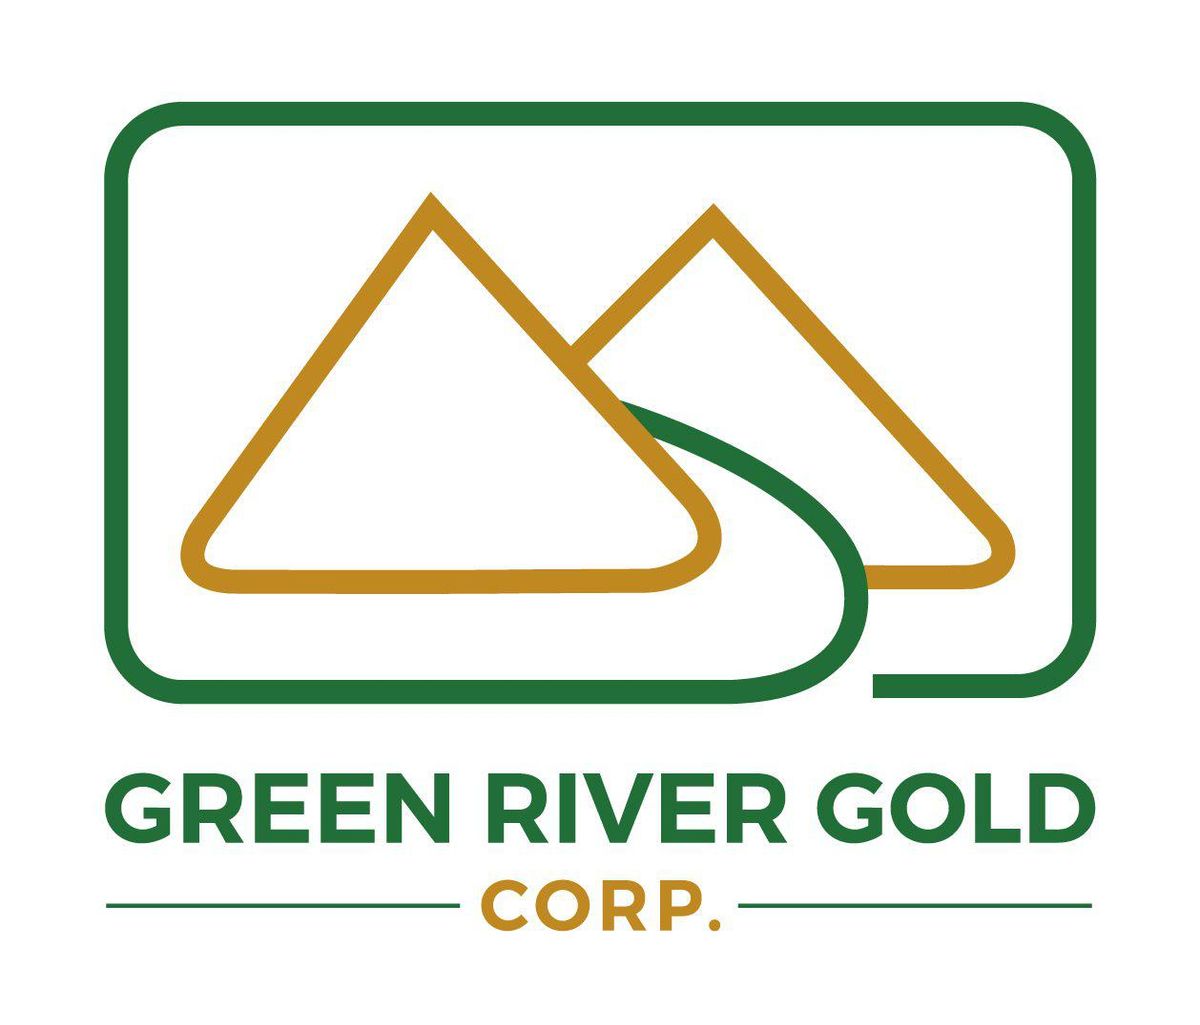 Green River Gold Corp. Intercepts 17.99% Magnesium and 0.19% Nickel over 10 Meters at the Quesnel Nickel/Talc Project